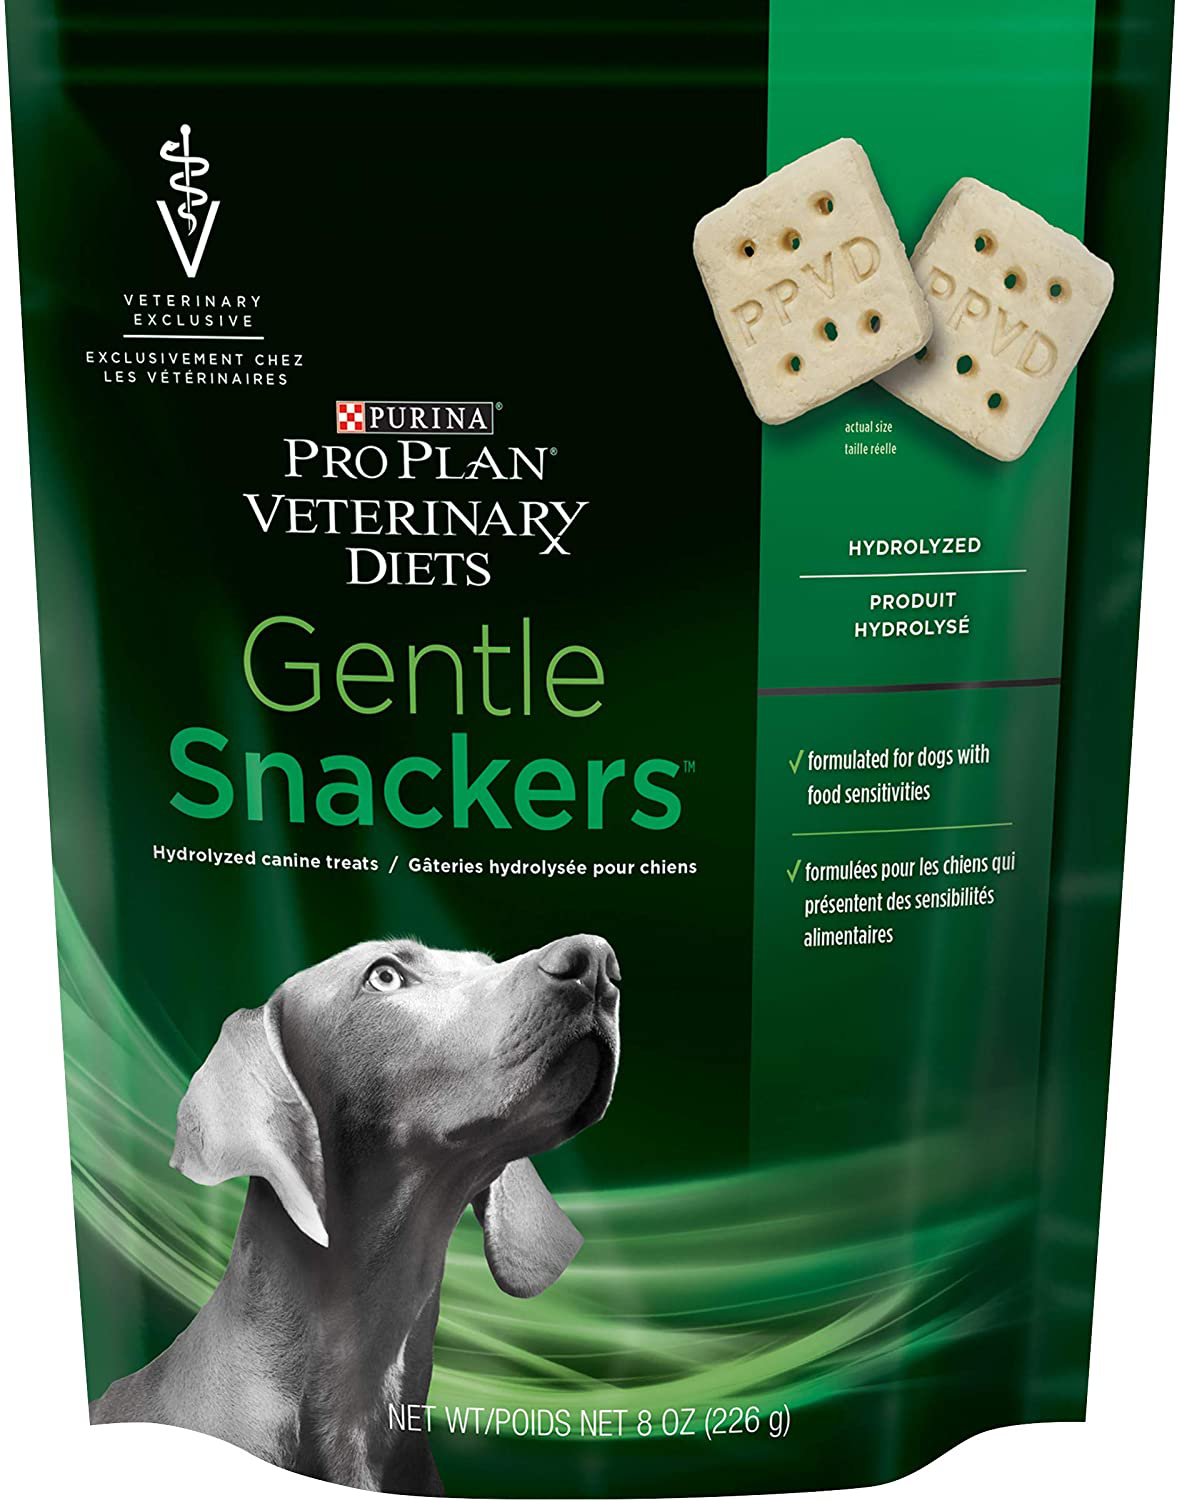 Purina Pro Plan Veterinary Diets Gentle Snackers Canine Dog Treats - 8 Oz. Pouch